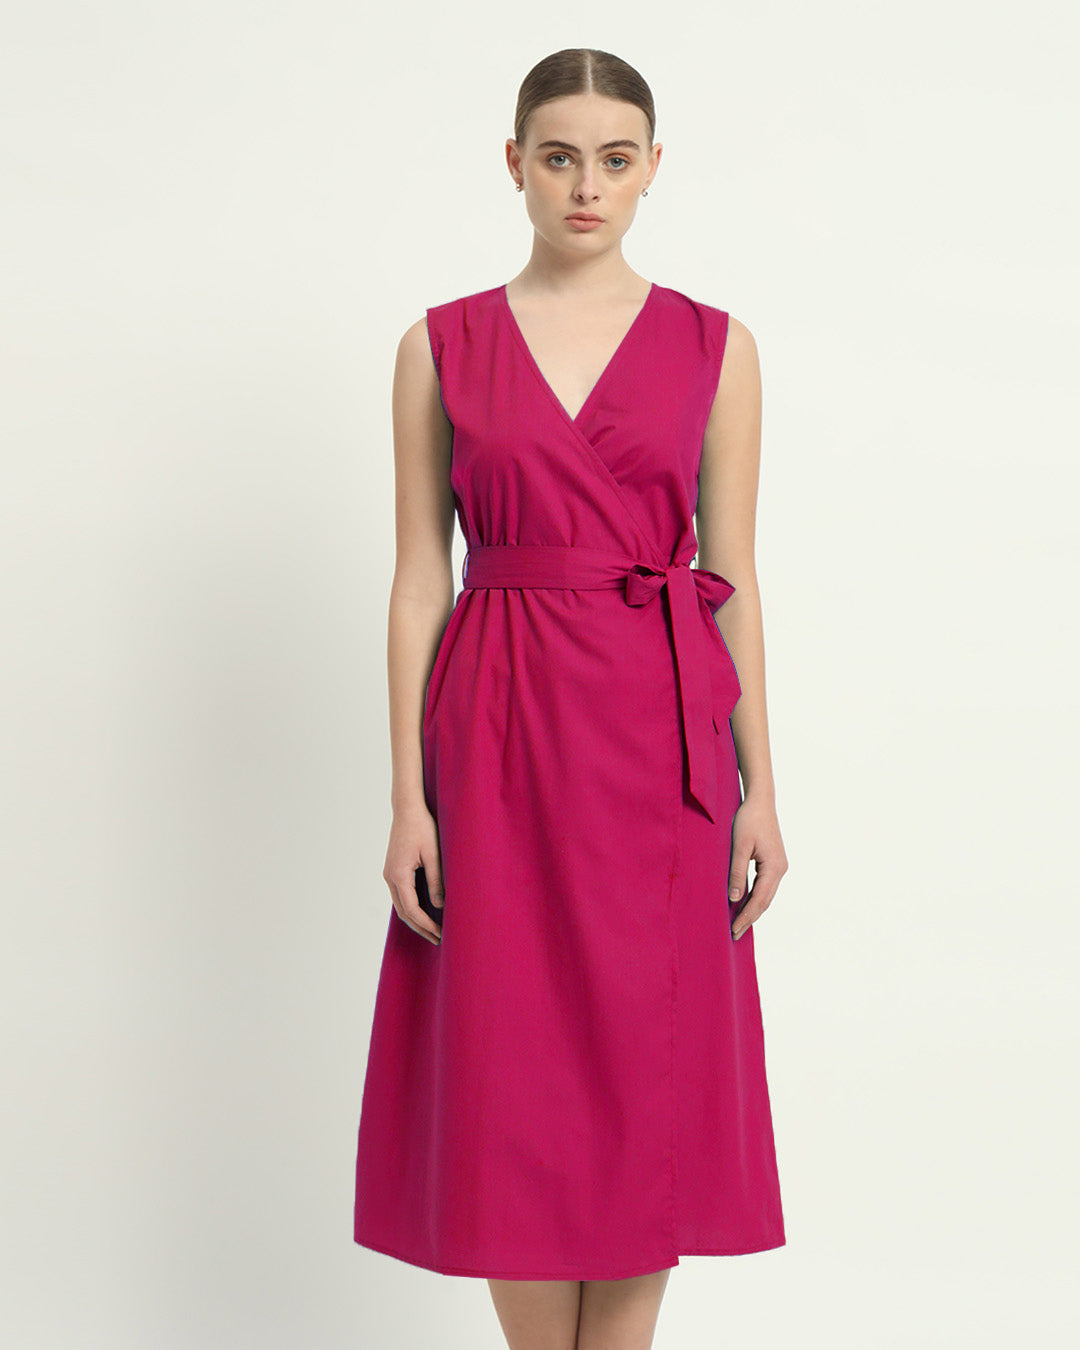 The Windsor Berry Cotton Dress